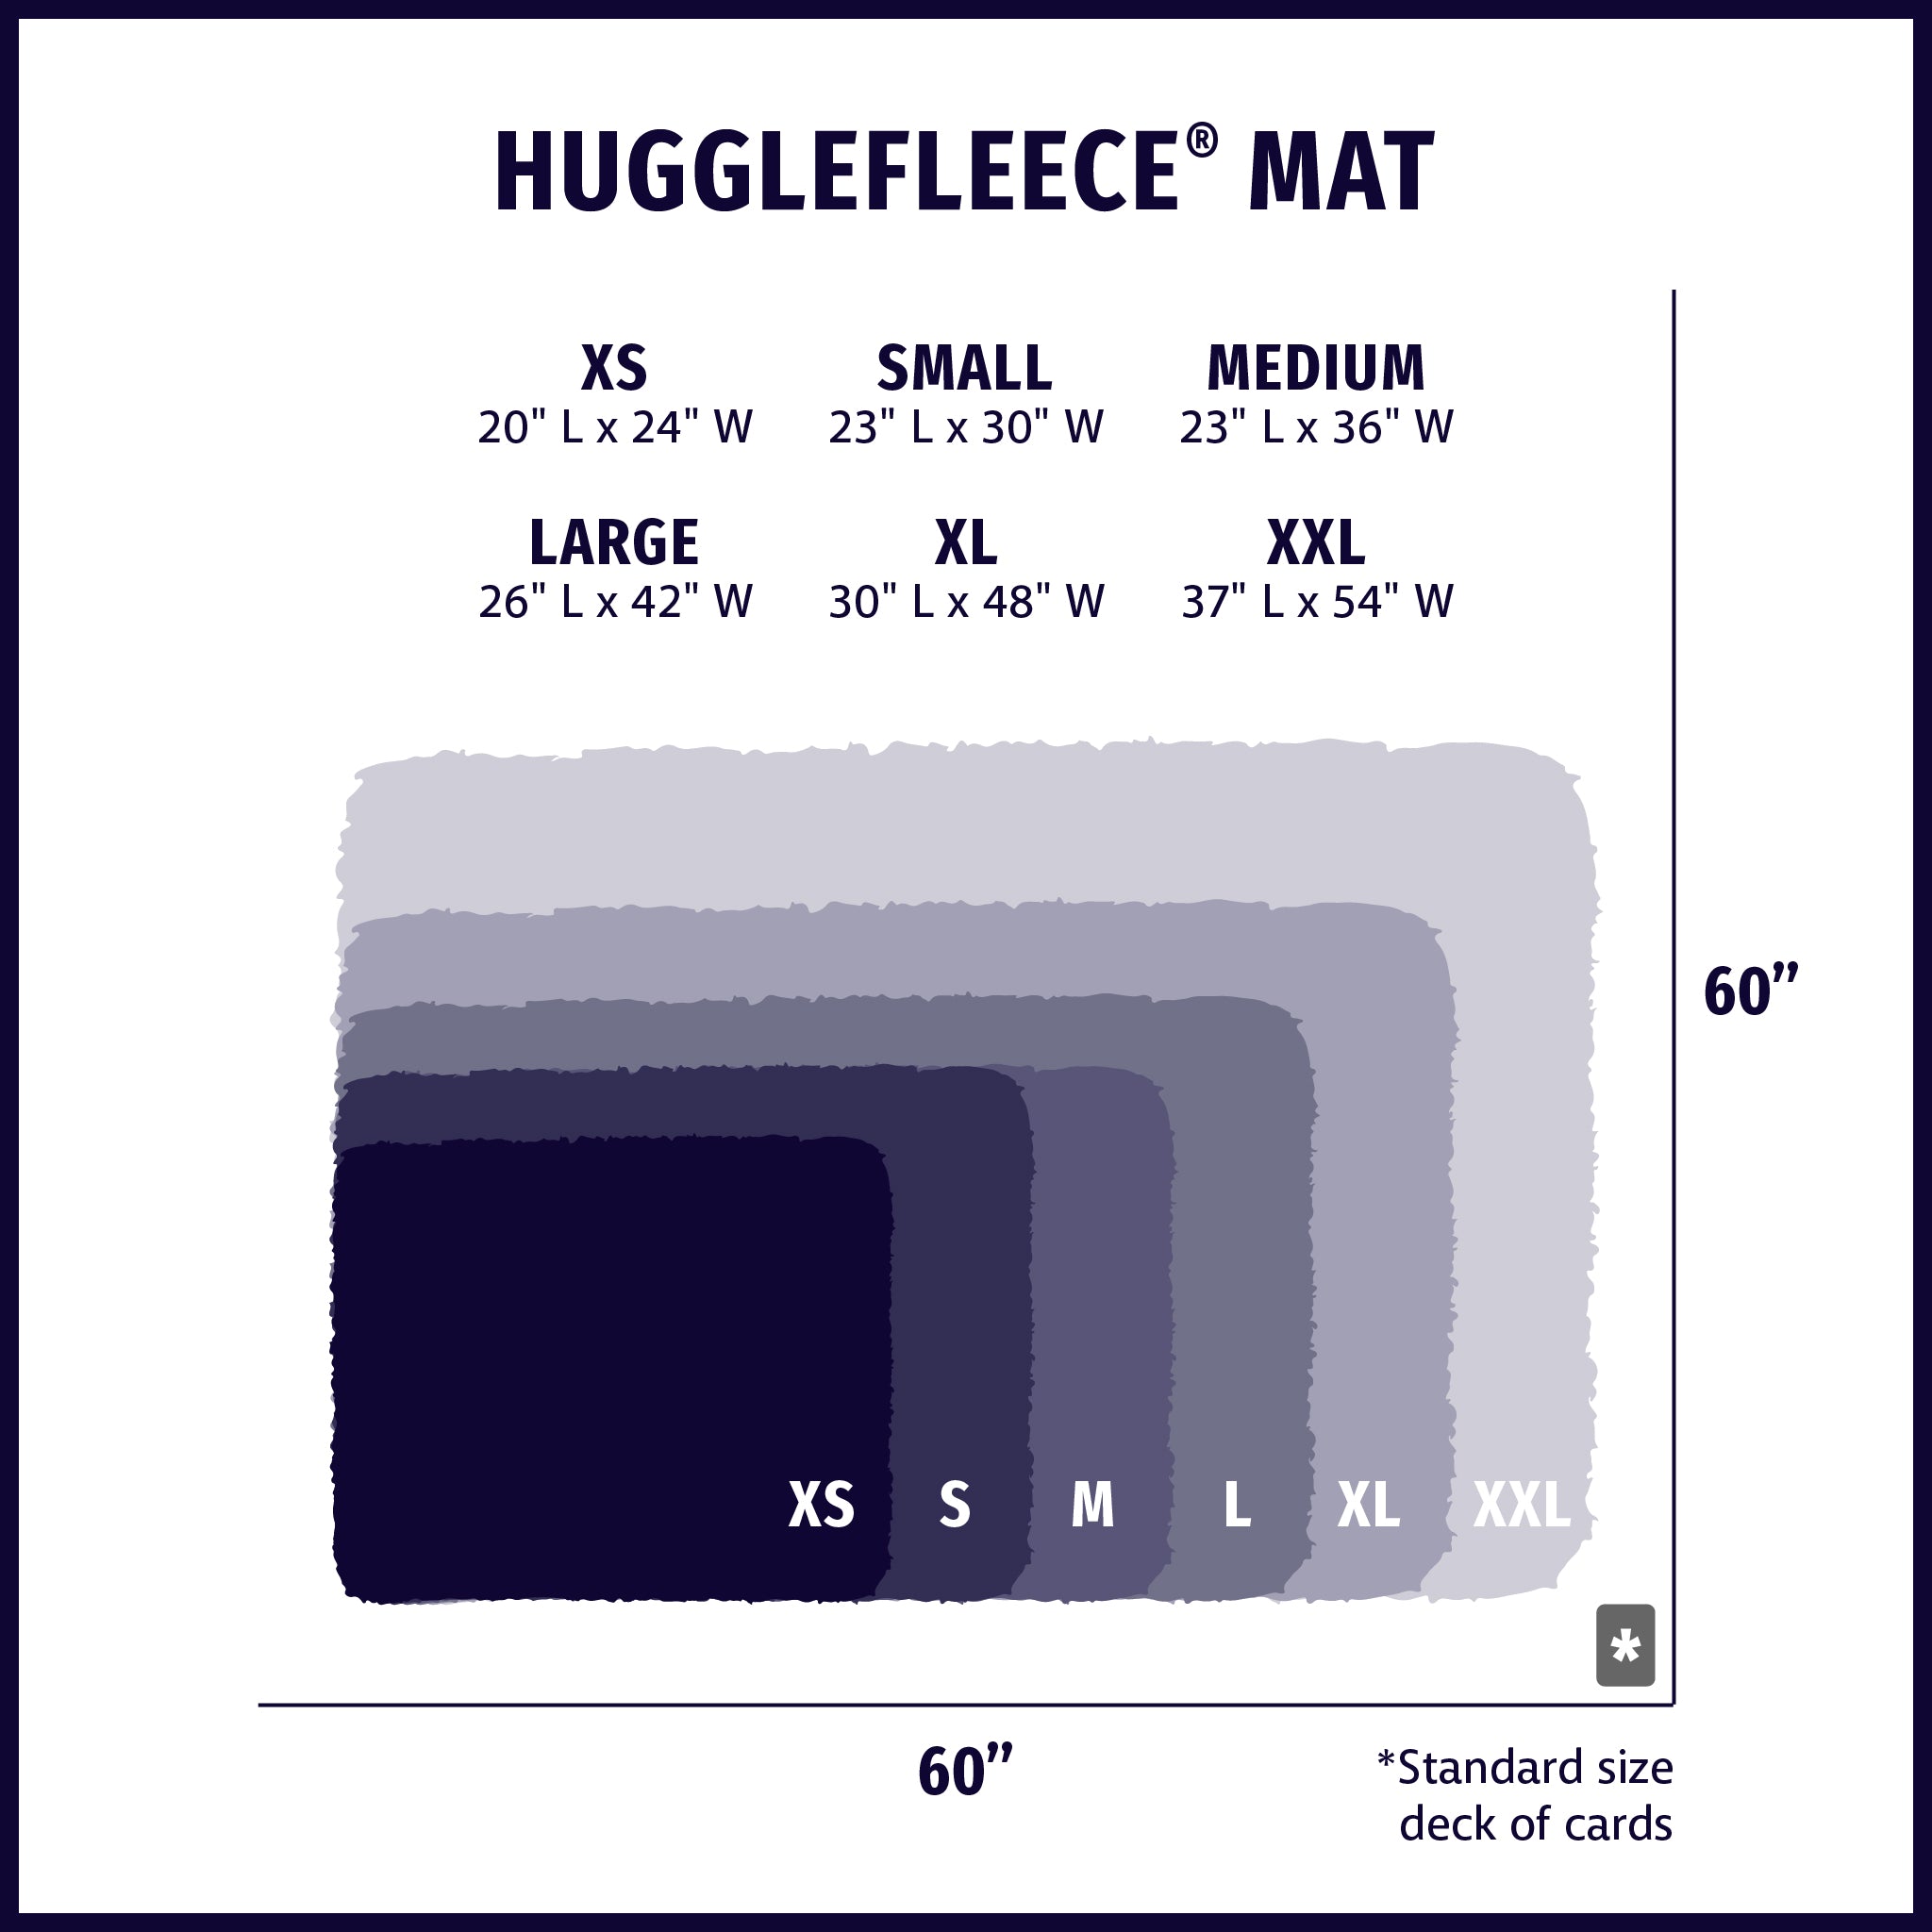 Size chart displaying HuggleFleece® dog/cat mat silhouettes in x-small through xx-large with approximate dimensions of each size compared to standard size deck of cards.